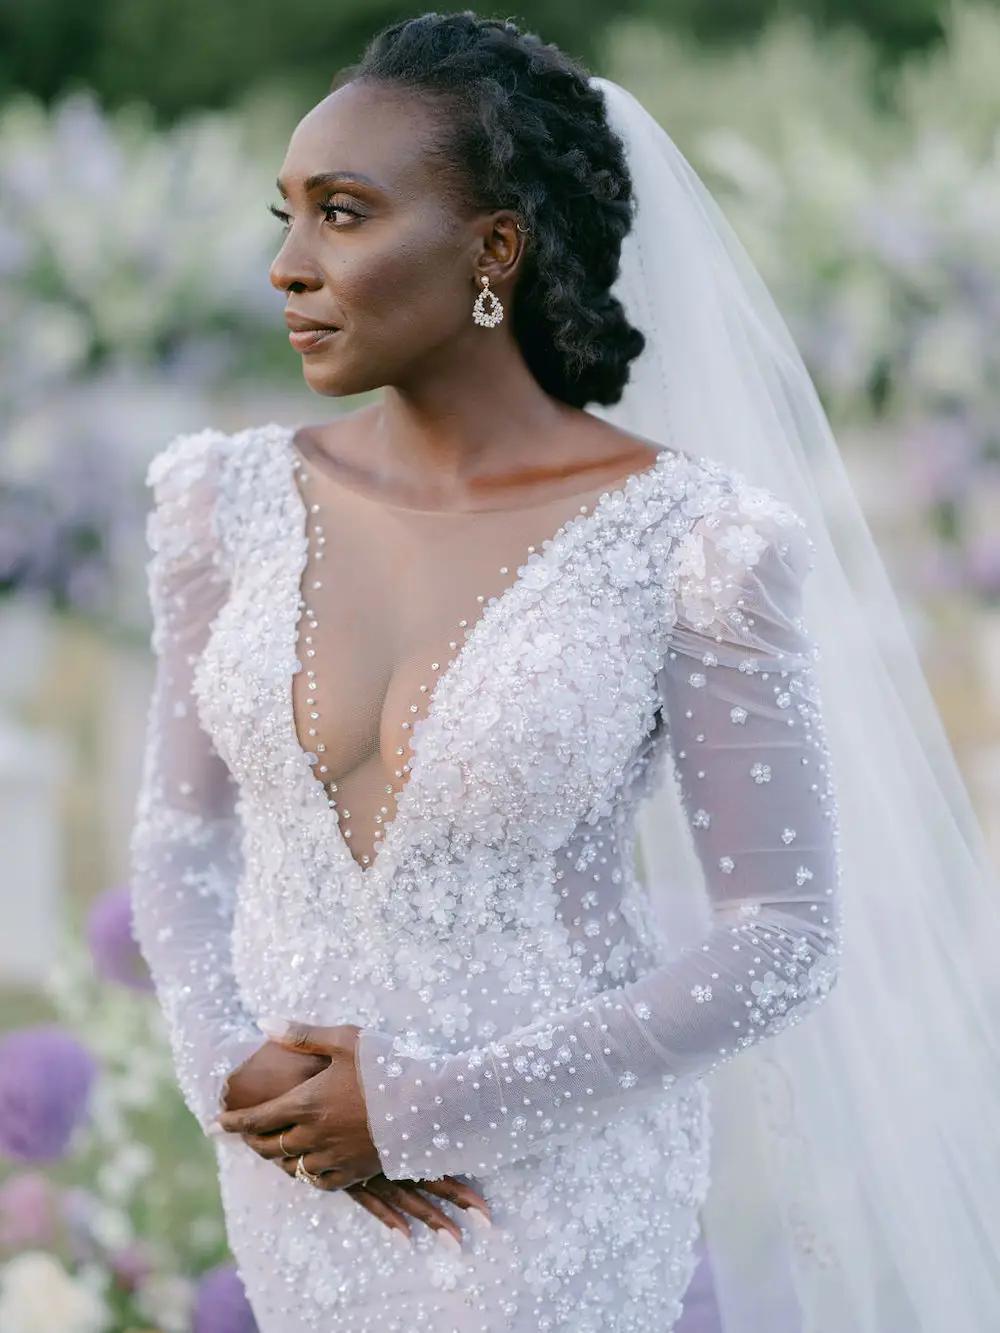 Agatha Wears Long Sleeve, Illusion Lace Wedding Dress with Pearls For Destination Wedding. Desktop Image